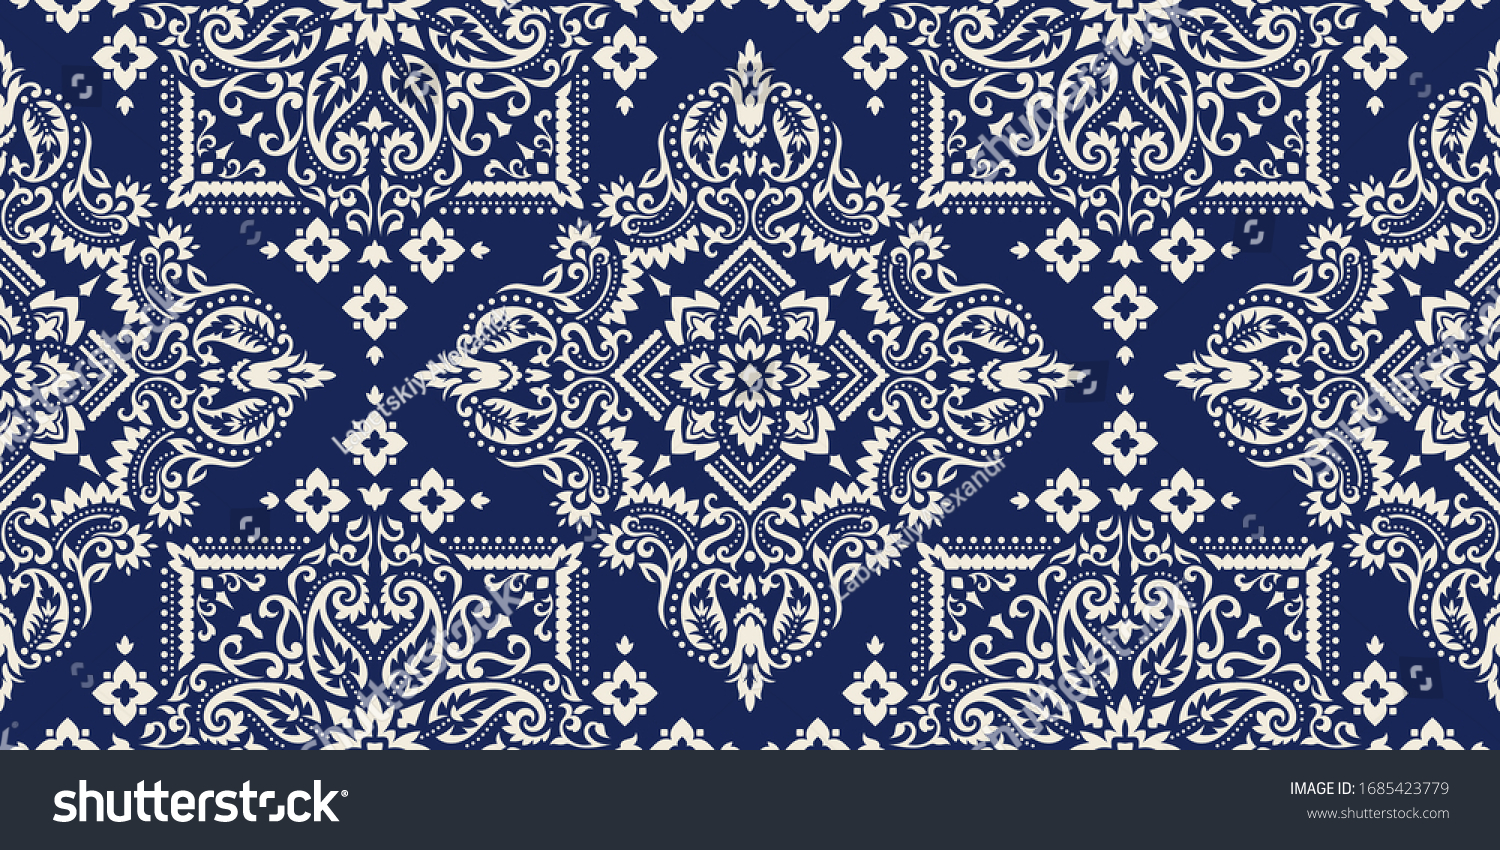 SVG of Seamless pattern based on ornament paisley Bandana Print. Boho vintage style vector background. Silk neck scarf or kerchief square pattern design style, best motive for print on fabric or paper. svg